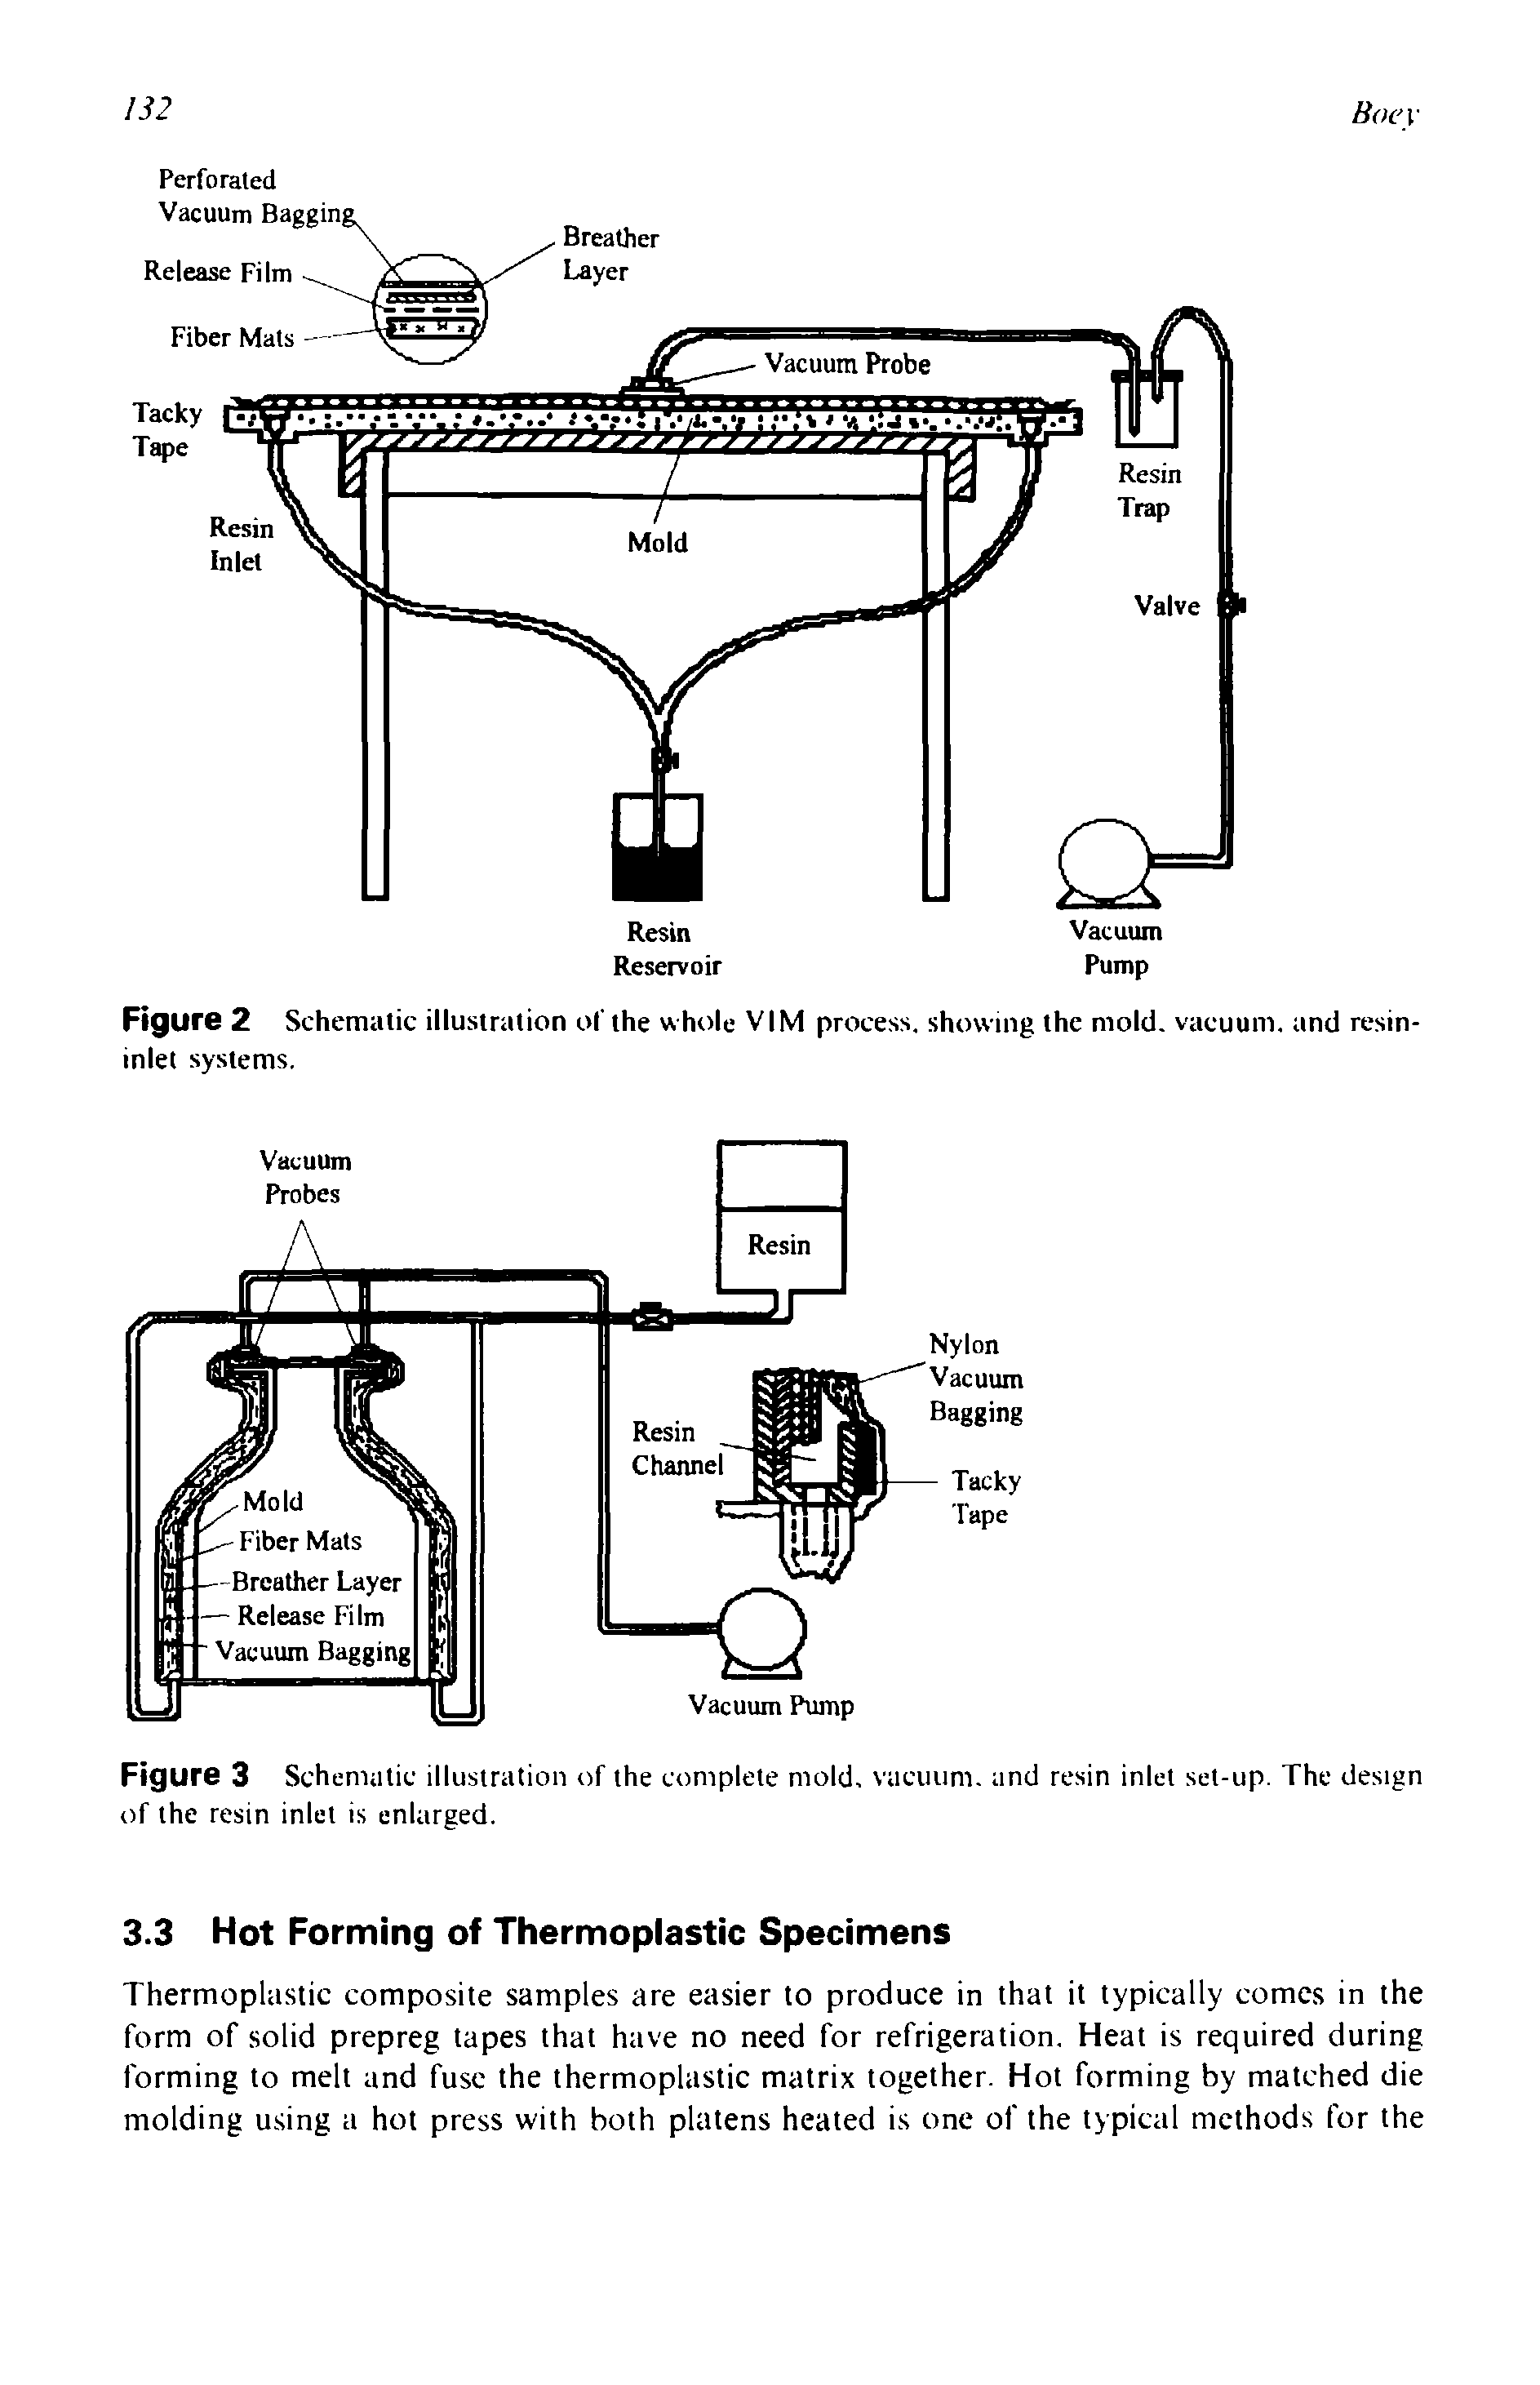 Figure 3 Schematic illustration of the complete mold, vacuum, and resin inlet set-up. The design of the resin inlet is enlarged.